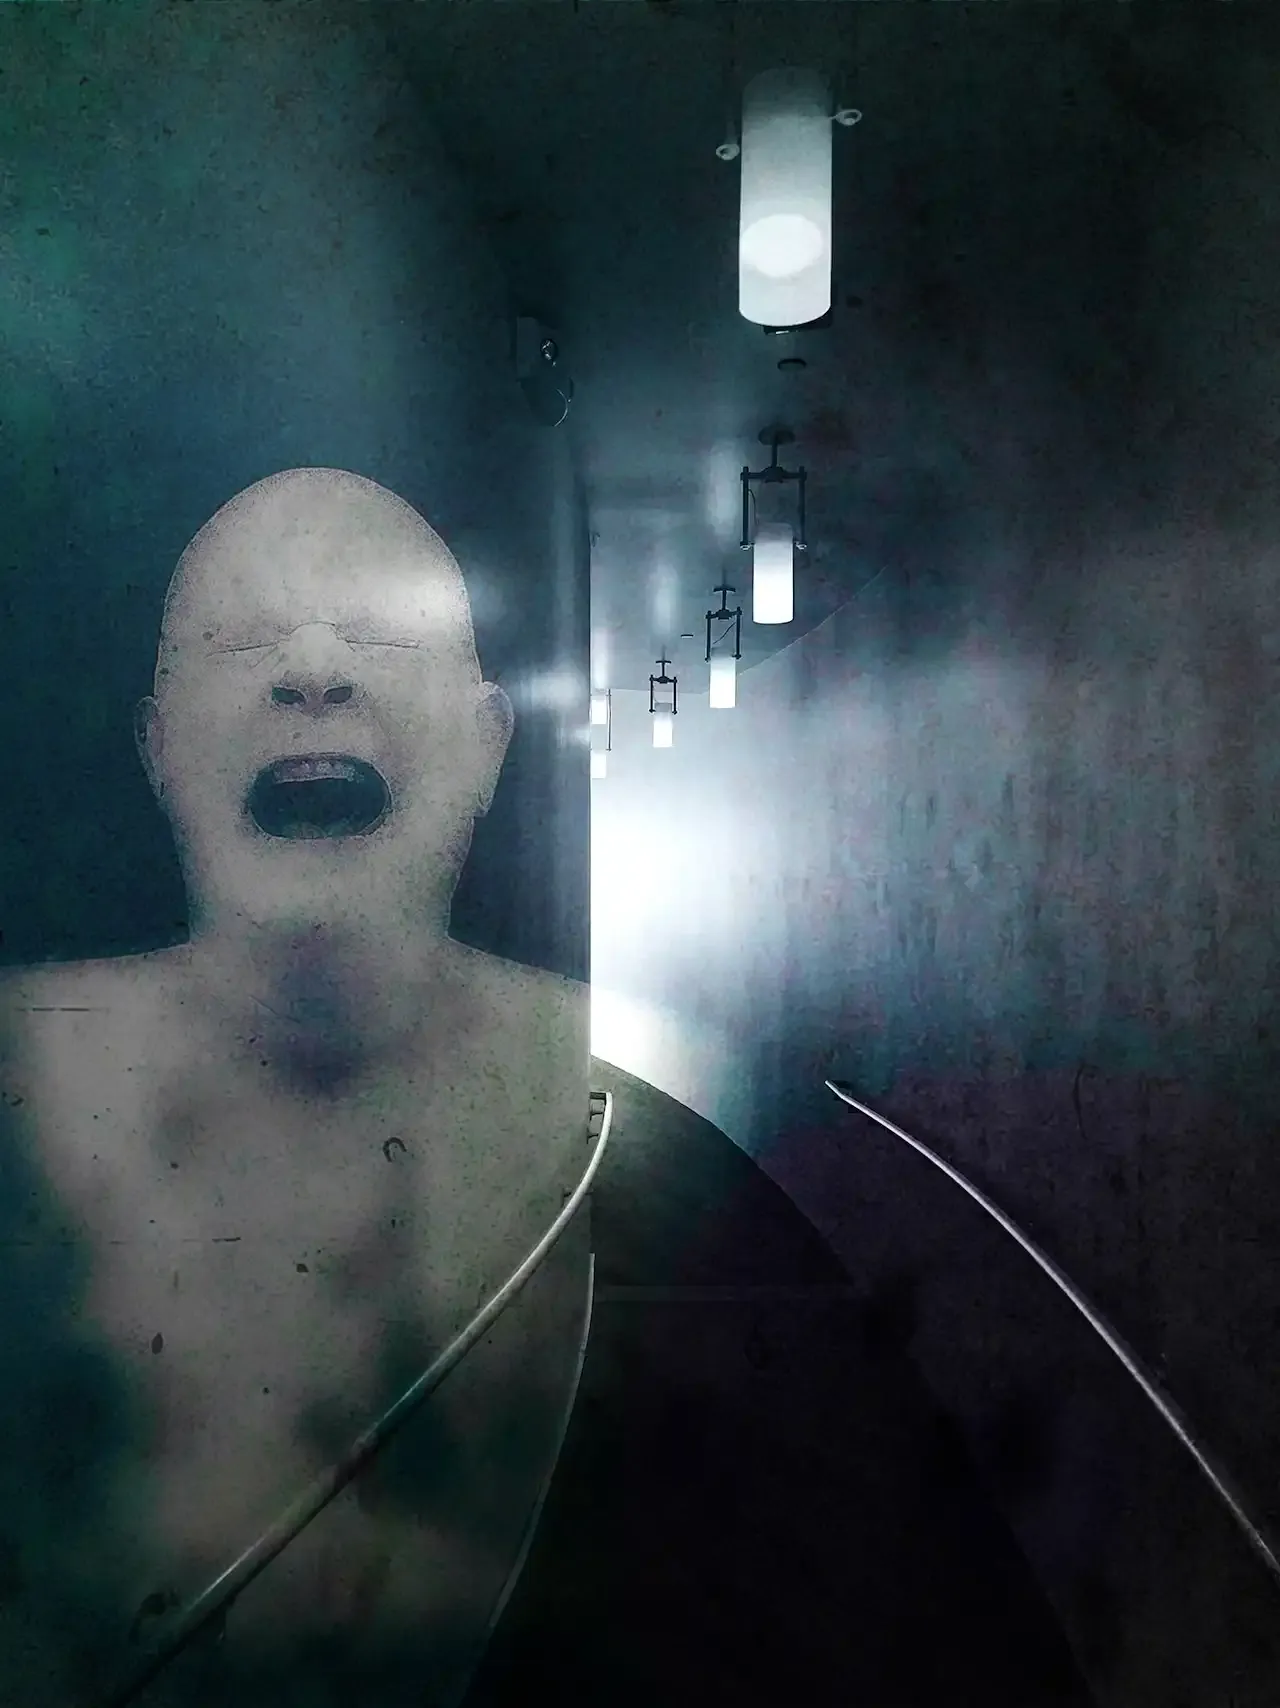 photomontage of a dark hallway curving towards light with a ghostly screaming figure superimposed on the wall